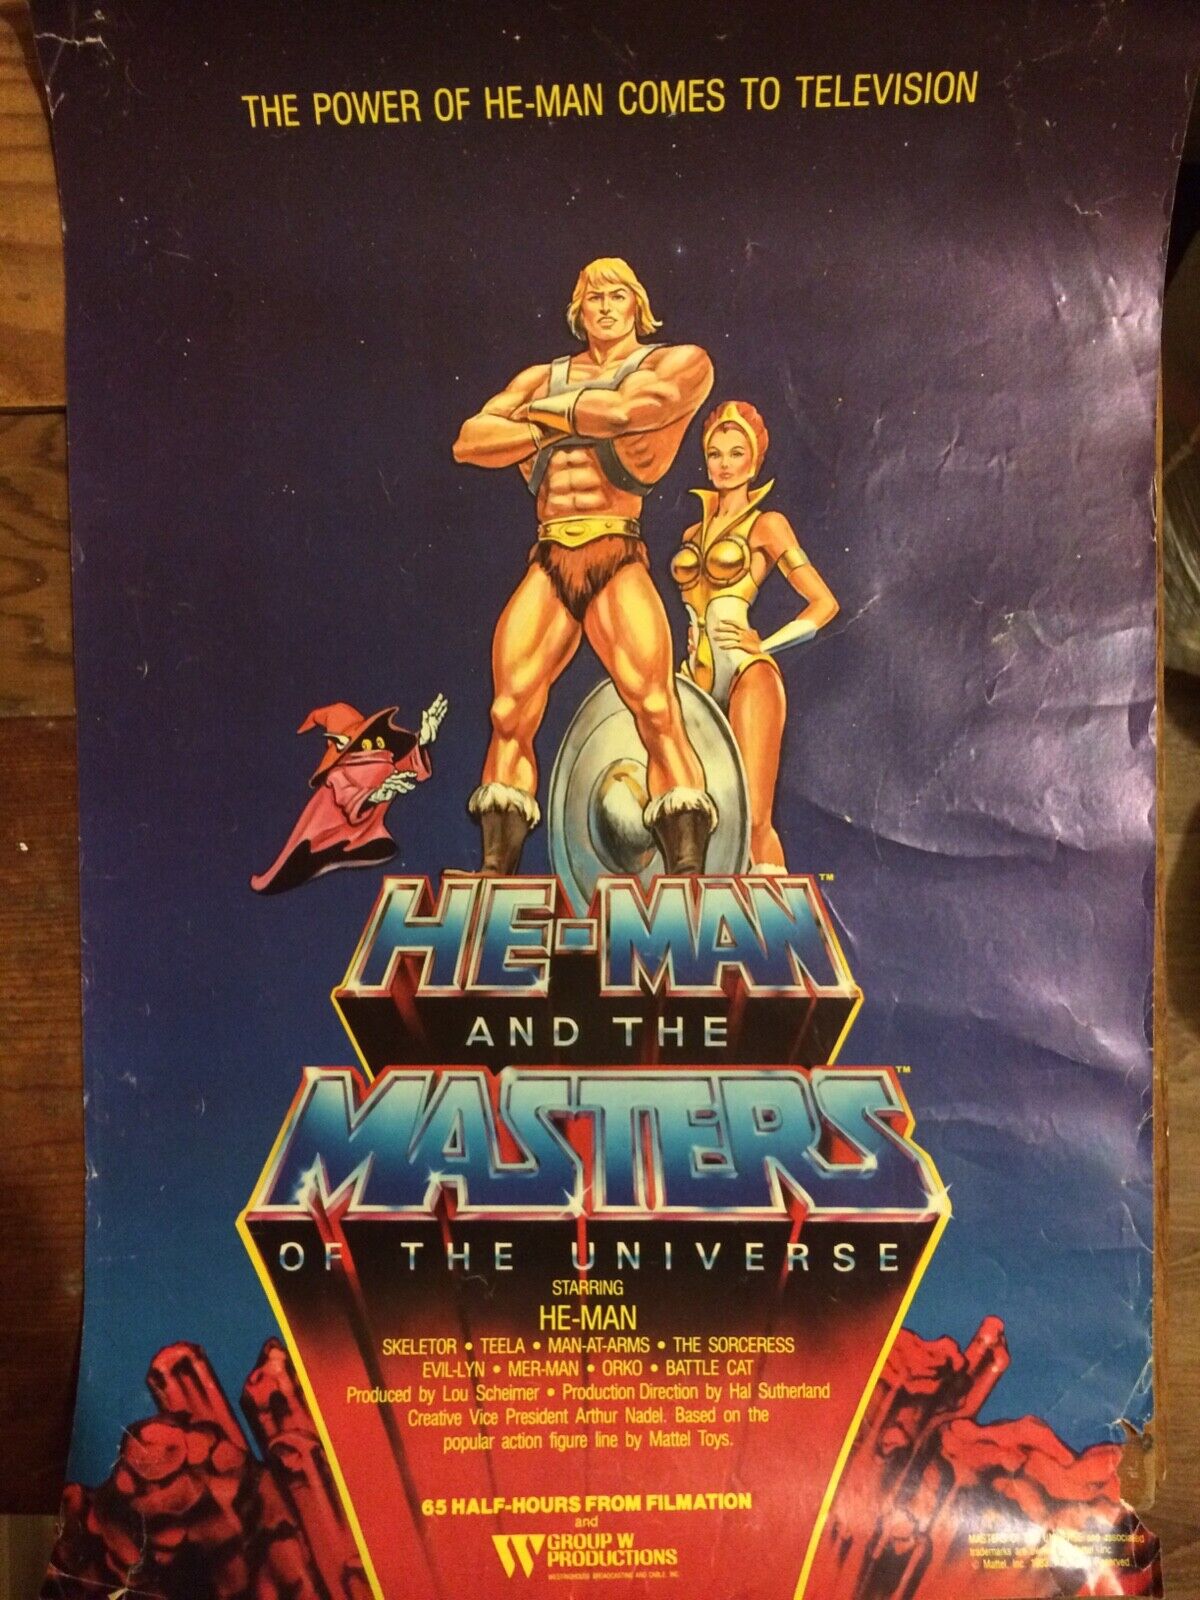 Vintage 1983 He-Man Poster 18x12 The Power of He-Man Comes to Television